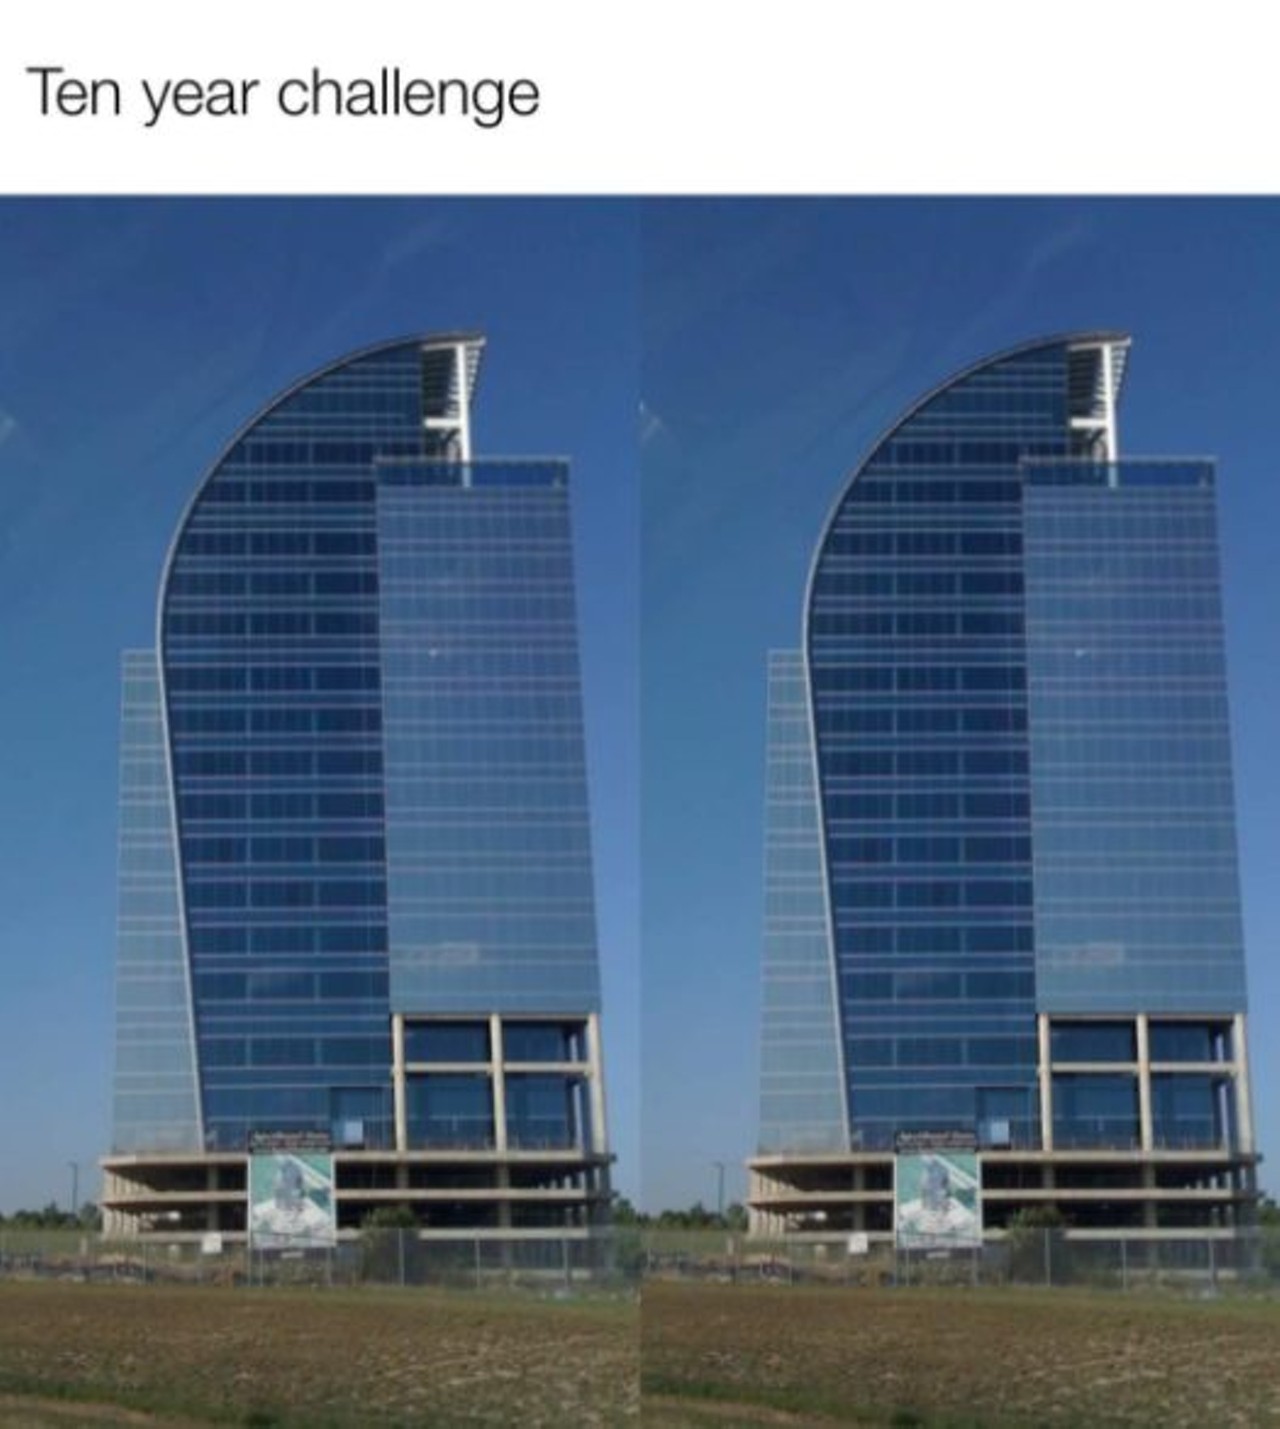 Celebrate 21 years of the 'I-4 eyesore' with some of our favorite jokes, memes